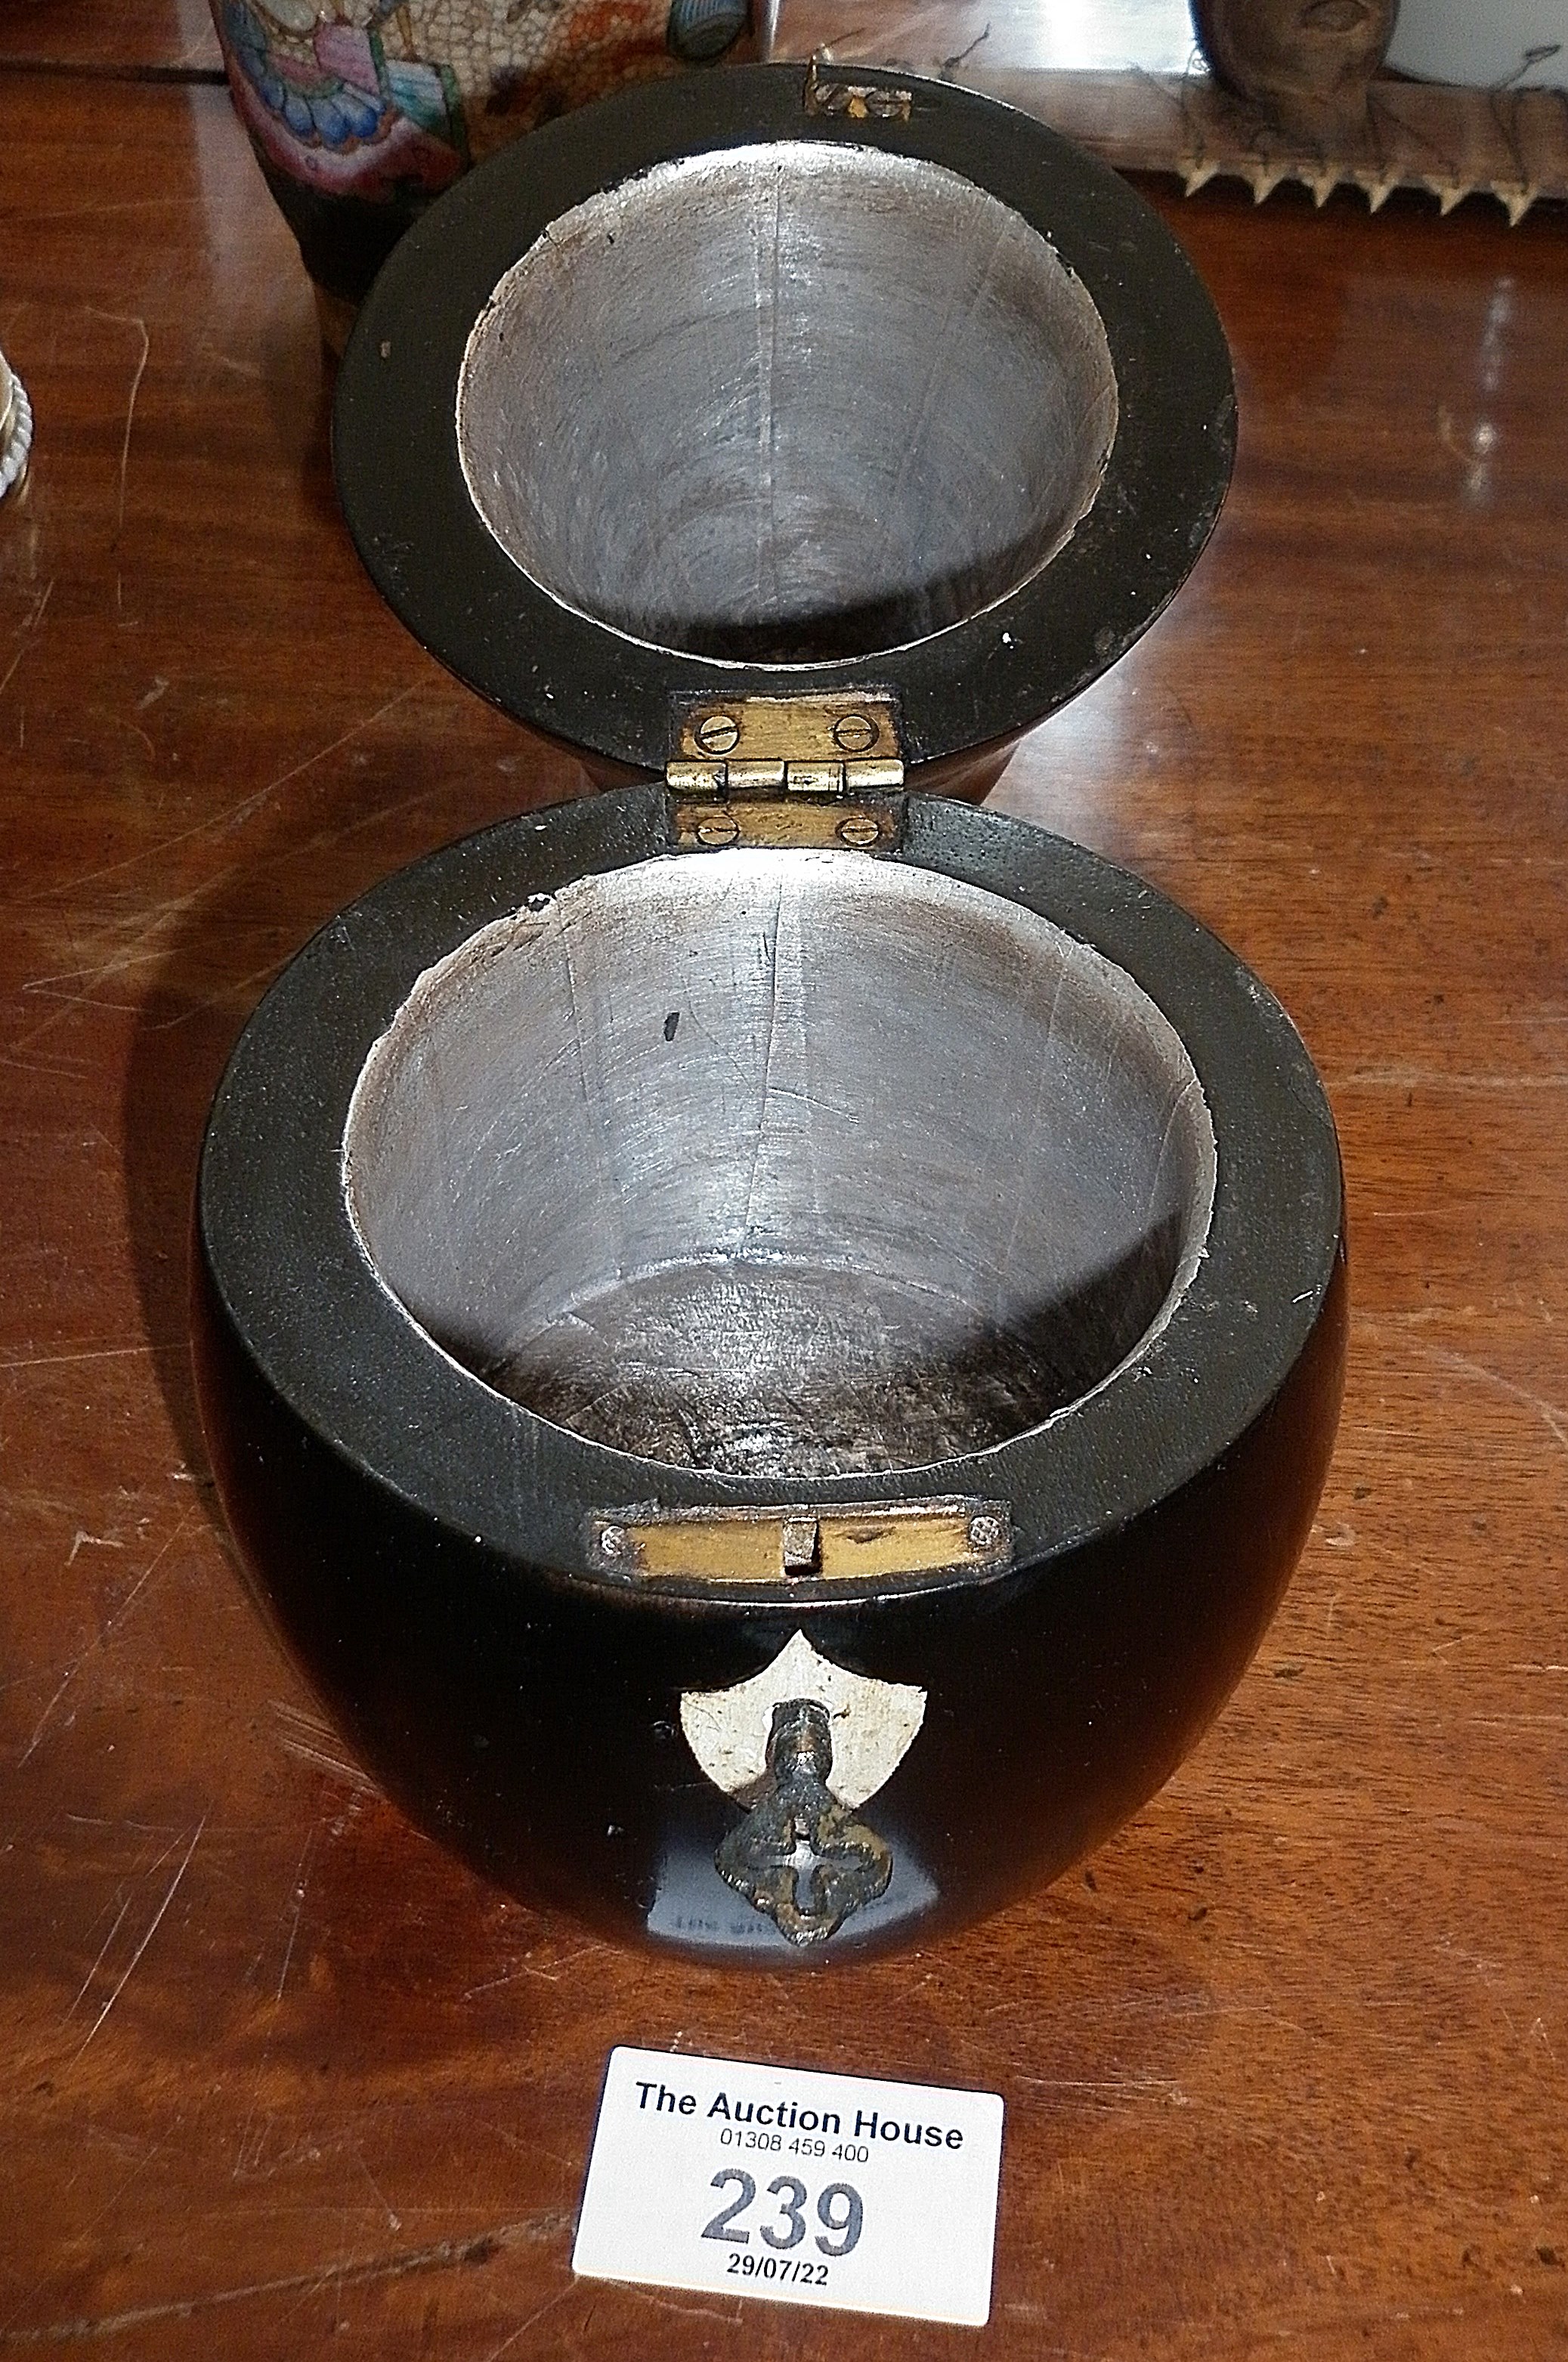 Ebonised wood pear-shaped tea caddy with key, lined, 7" high - Image 2 of 2